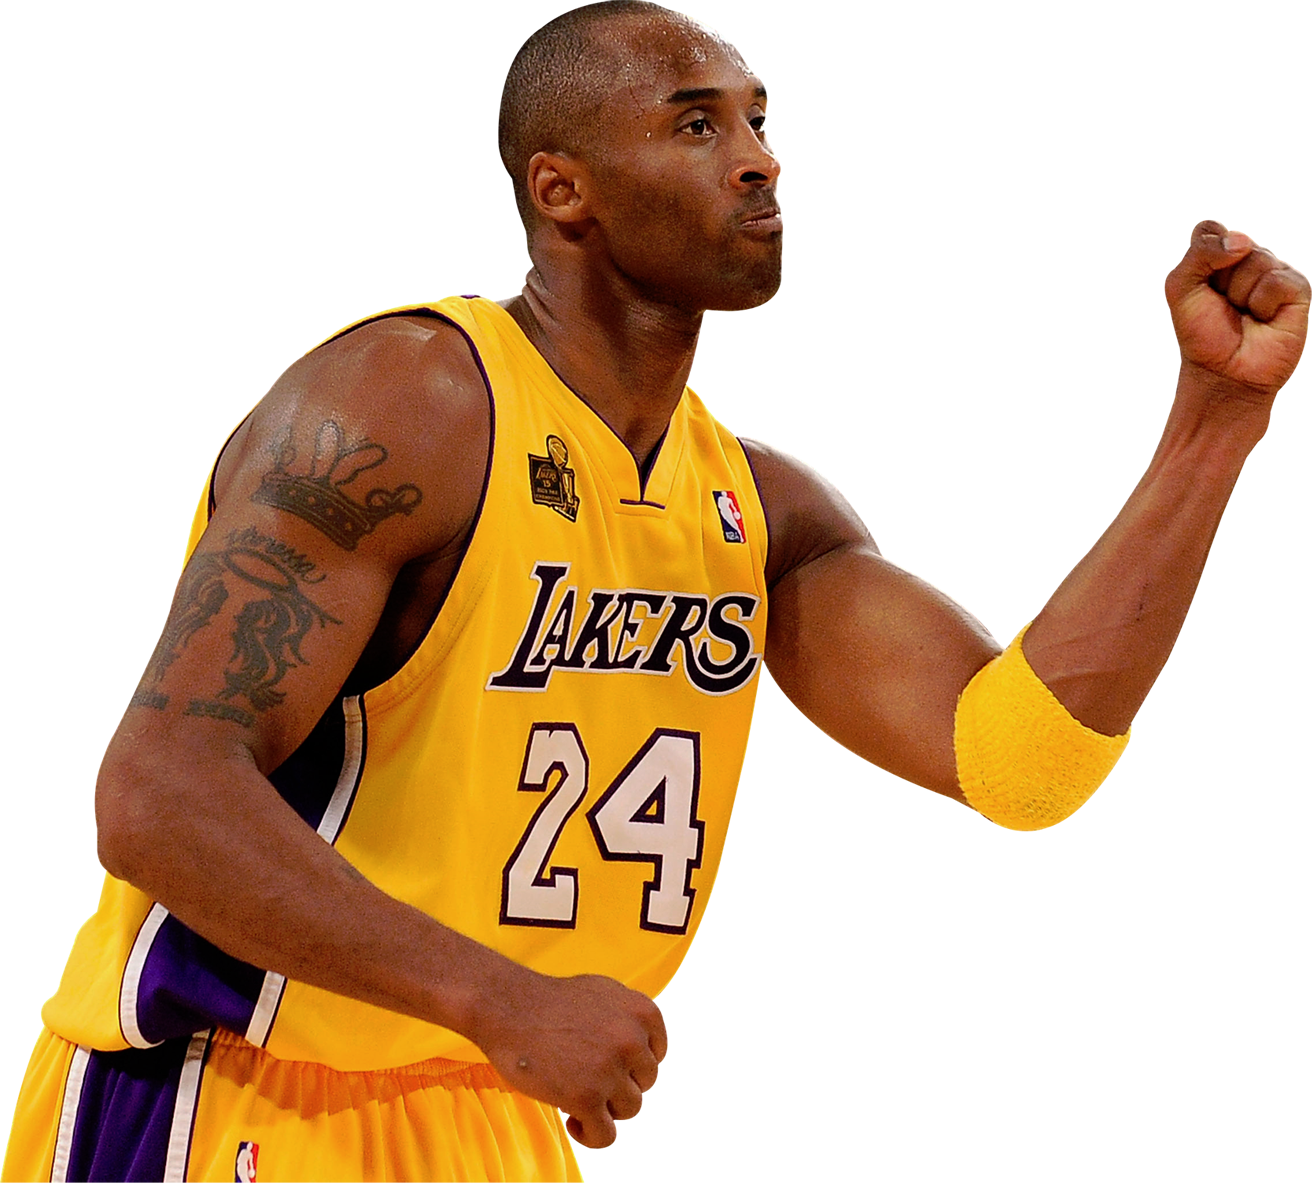 Lakers Player Celebration Pose PNG image